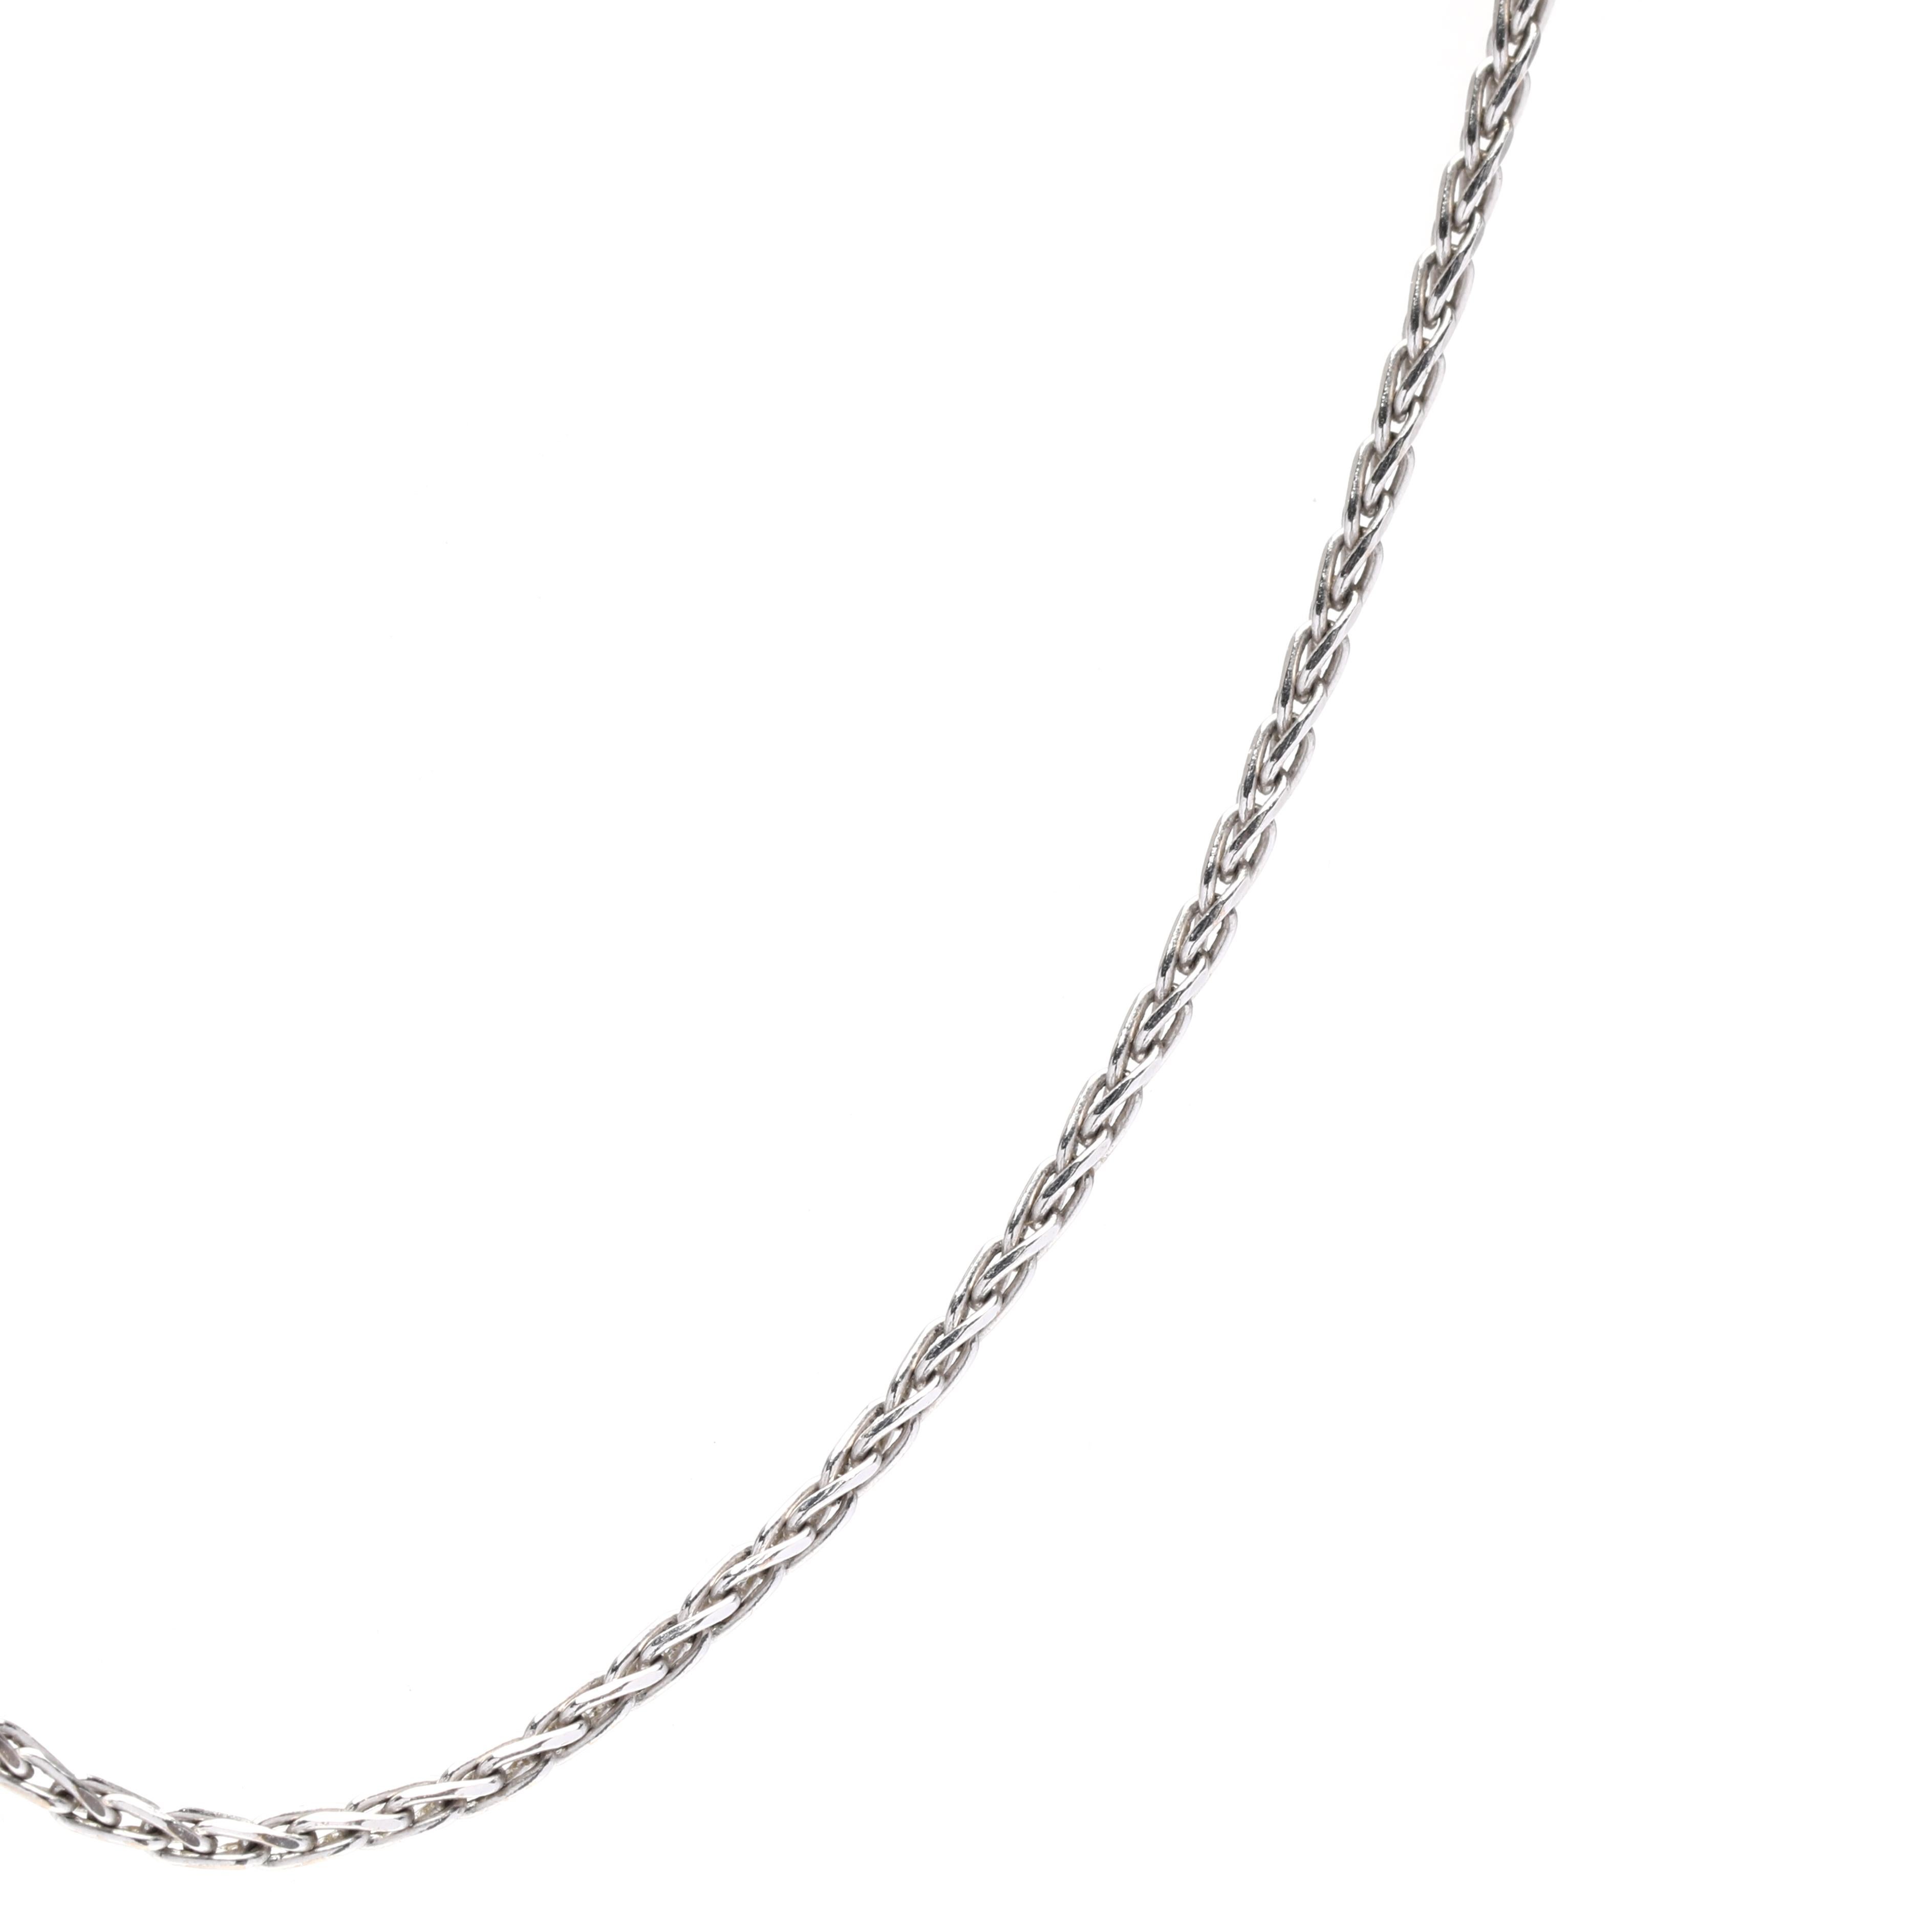 This stunning 14K white gold wheat chain is perfect for layering and stacking. Crafted from genuine 14K white gold, this thin pendant chain is 18 inches in length and has a delicate wheat pattern. Perfect for a special occasion or everyday wear,